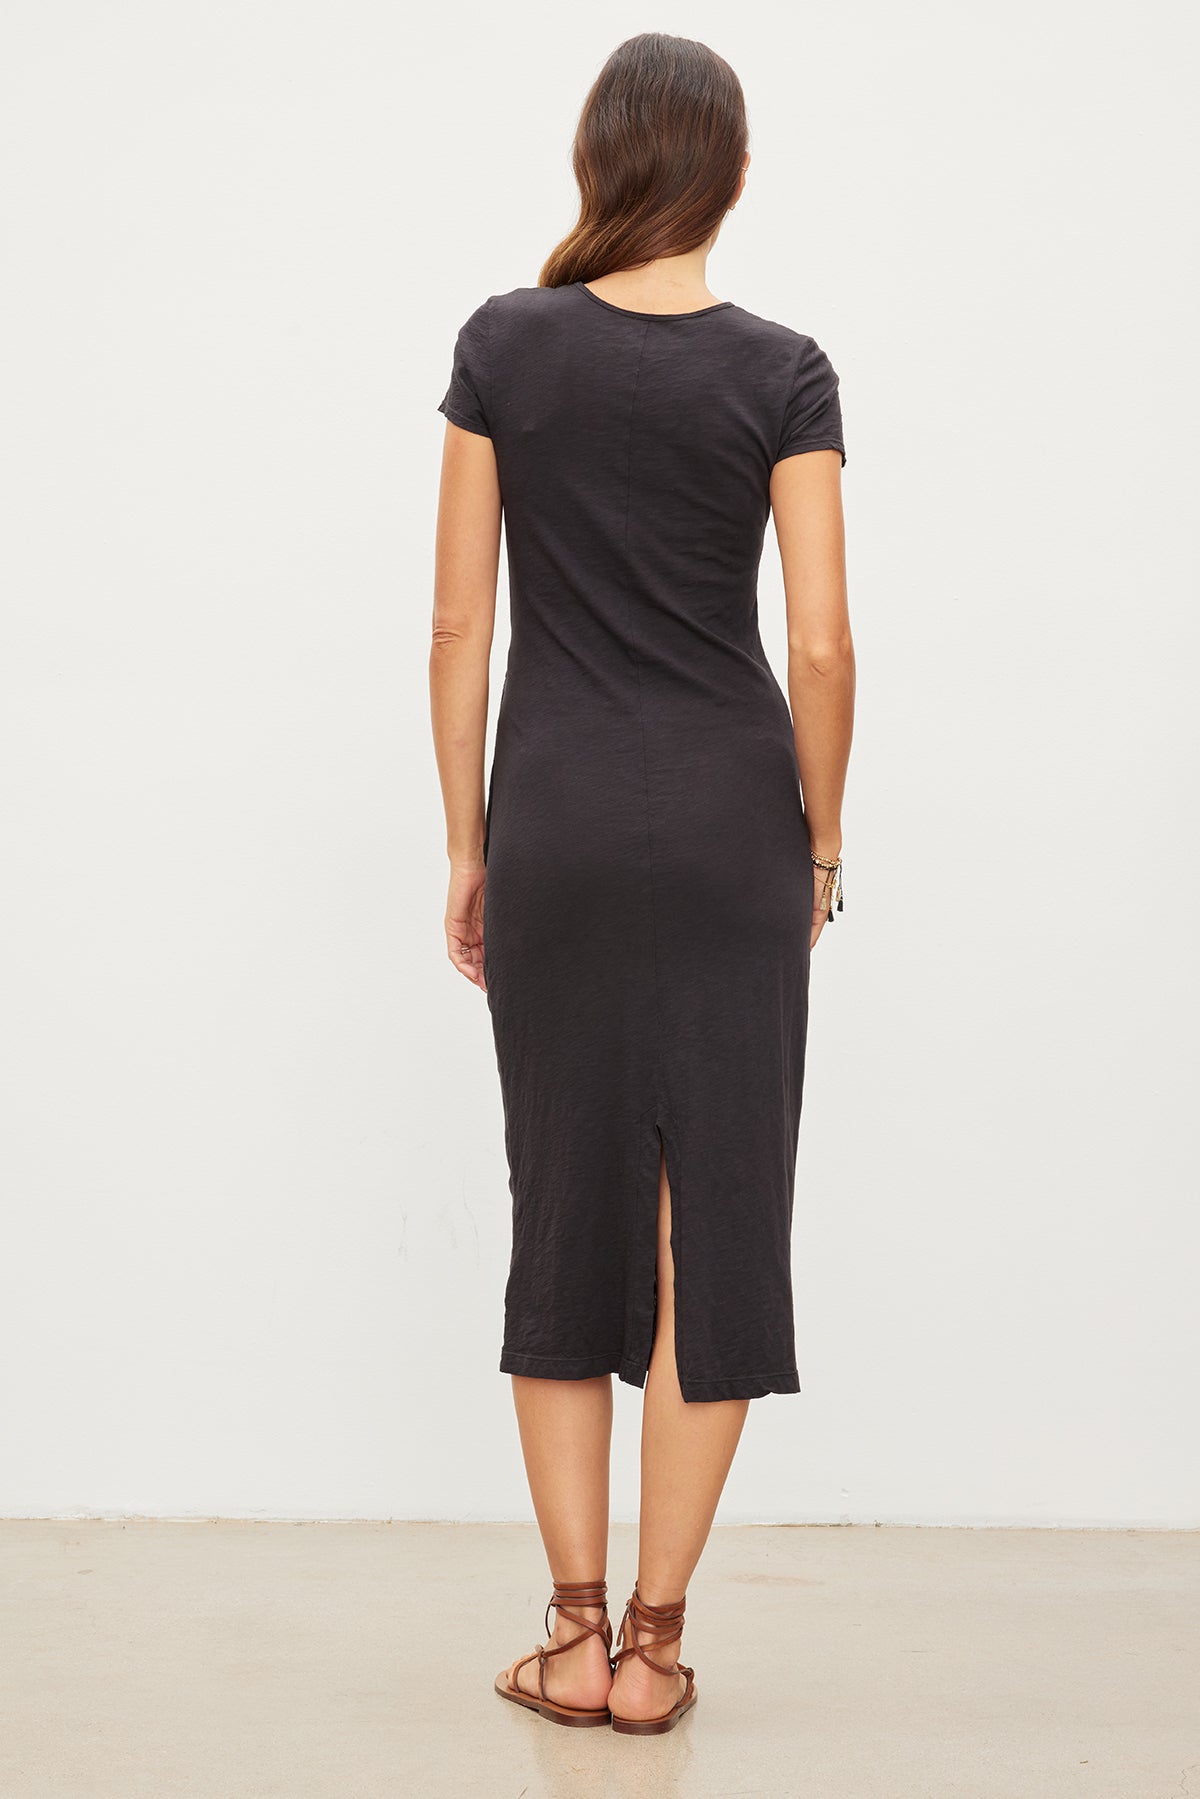 The back view of a woman wearing a Velvet by Graham & Spencer Darcy Cotton Slub Midi Dress.-35955695878337